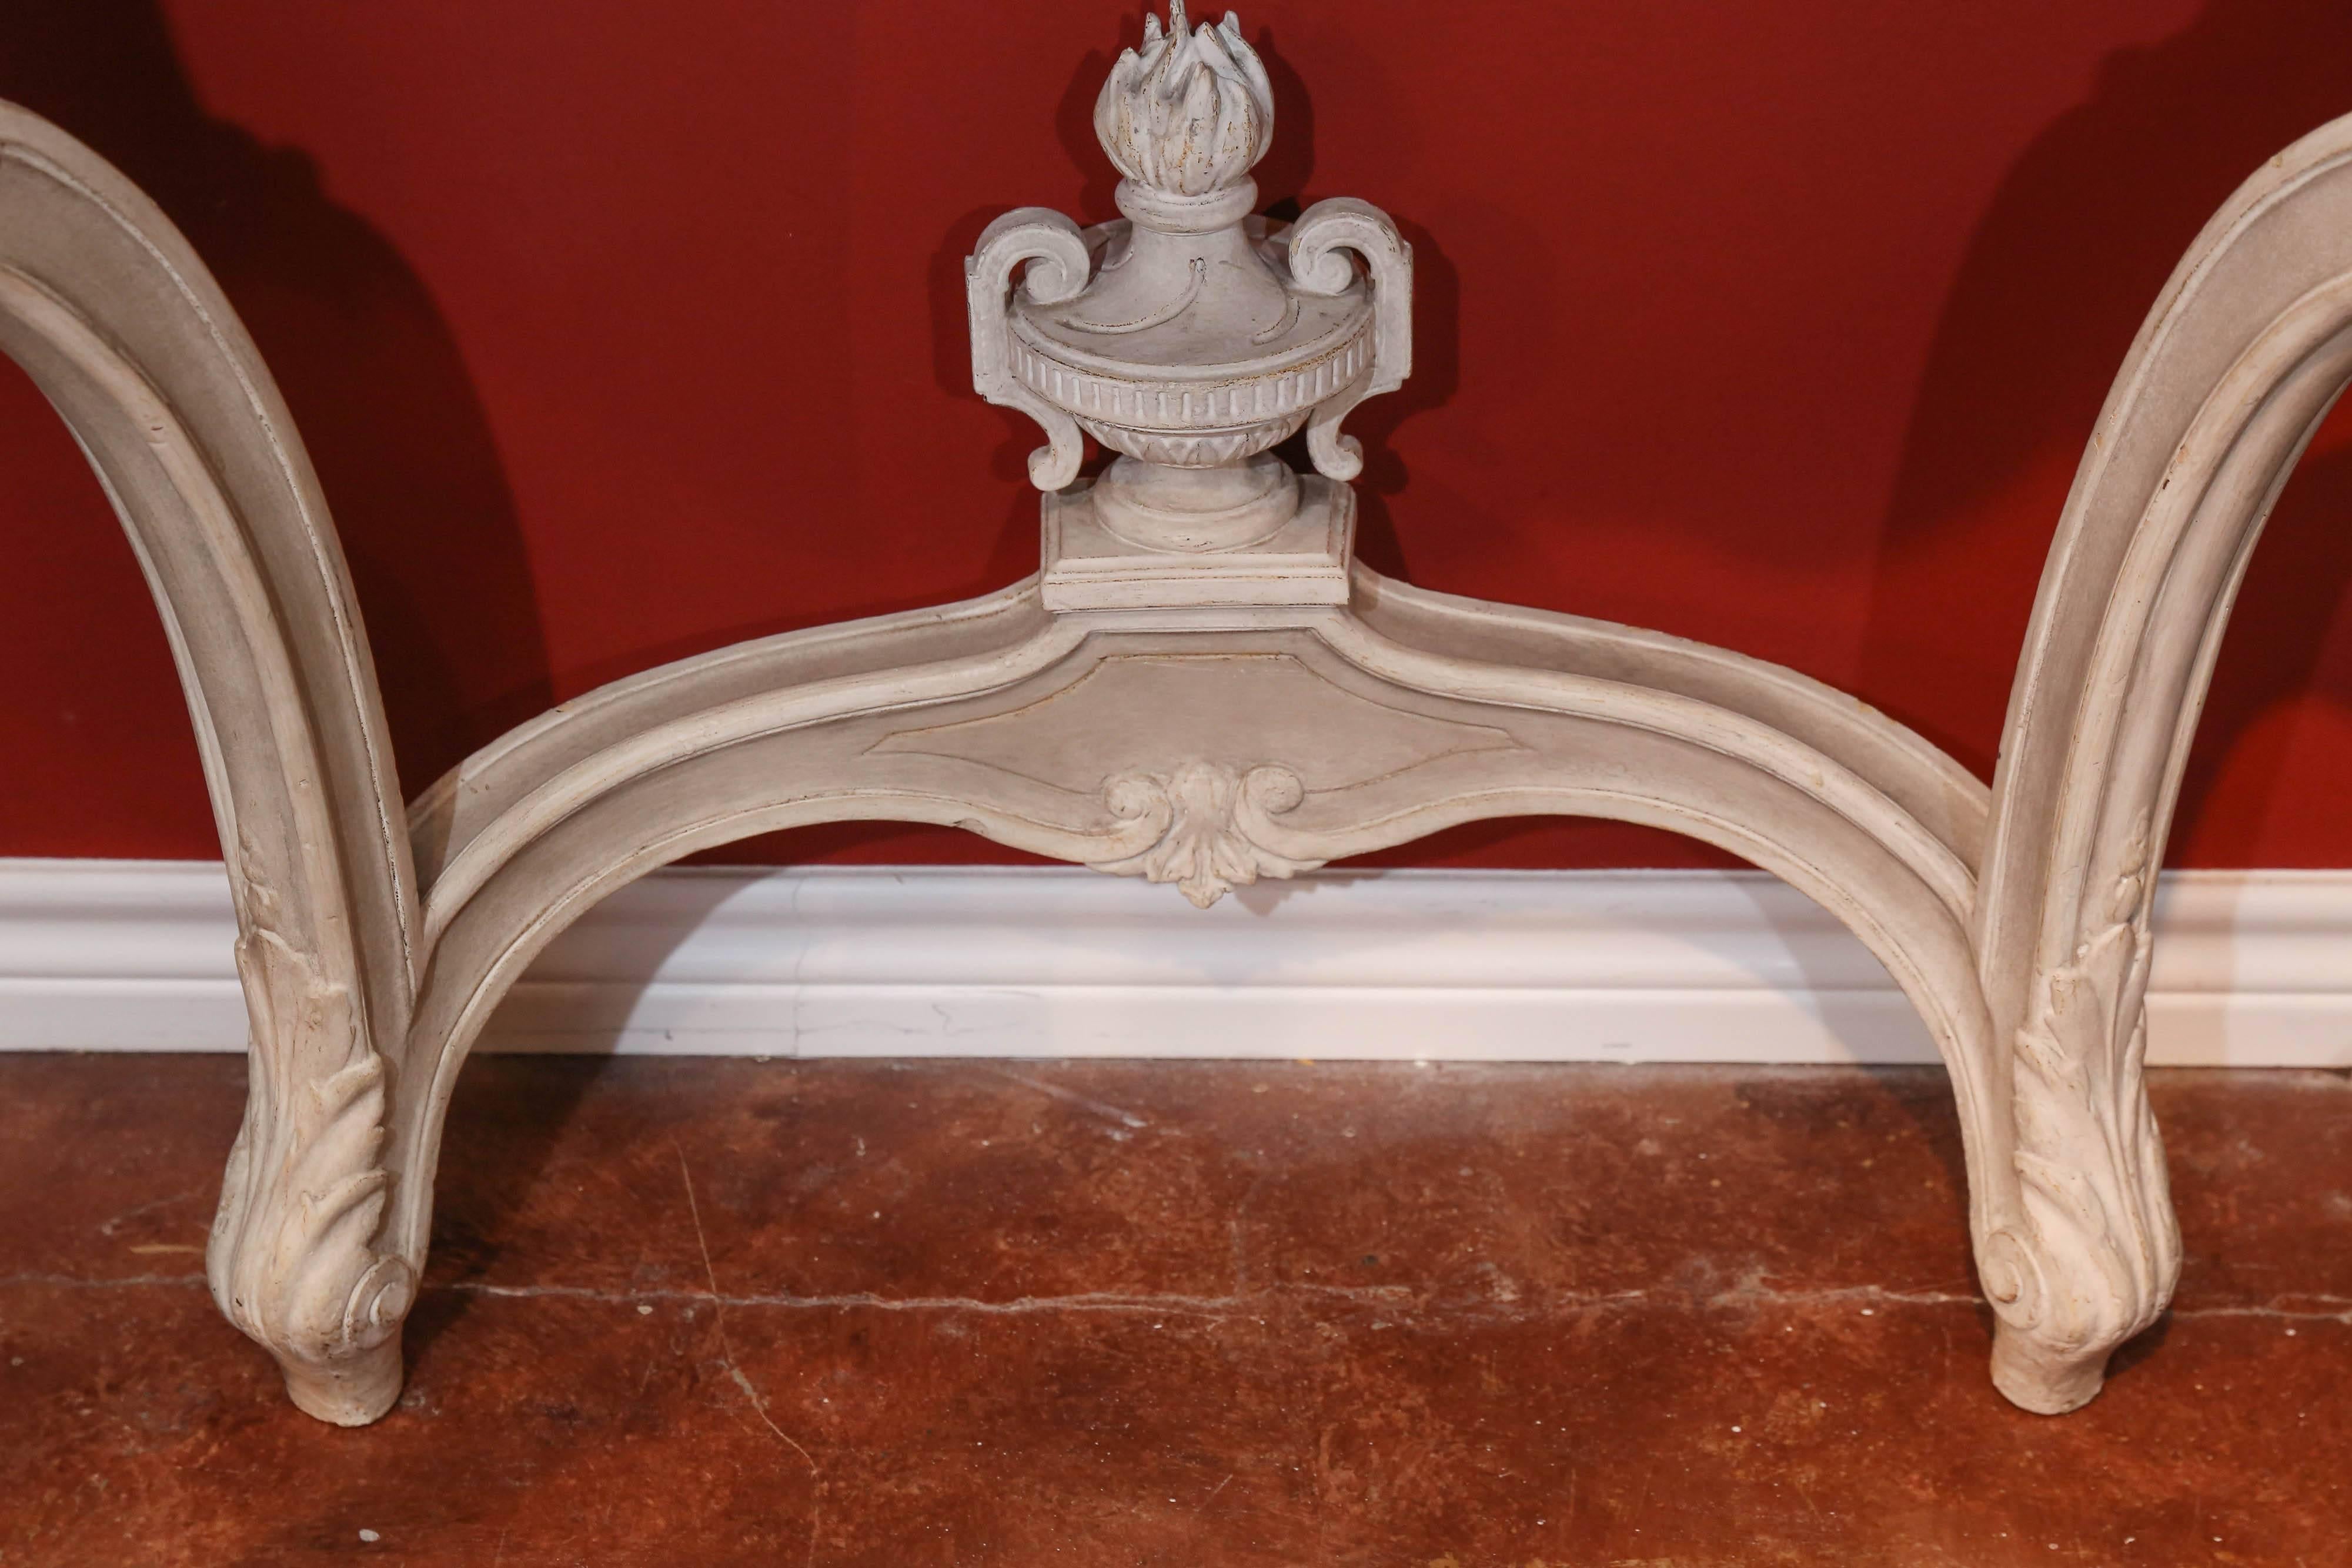 Beautiful pair of wall attached consoles painted in a cream/gray finish
having marble tops in a variegated gray and white color. Serpentine
leg in a Louis XV transitional foot. All in very good condition. The front
is carved in a lovely shell